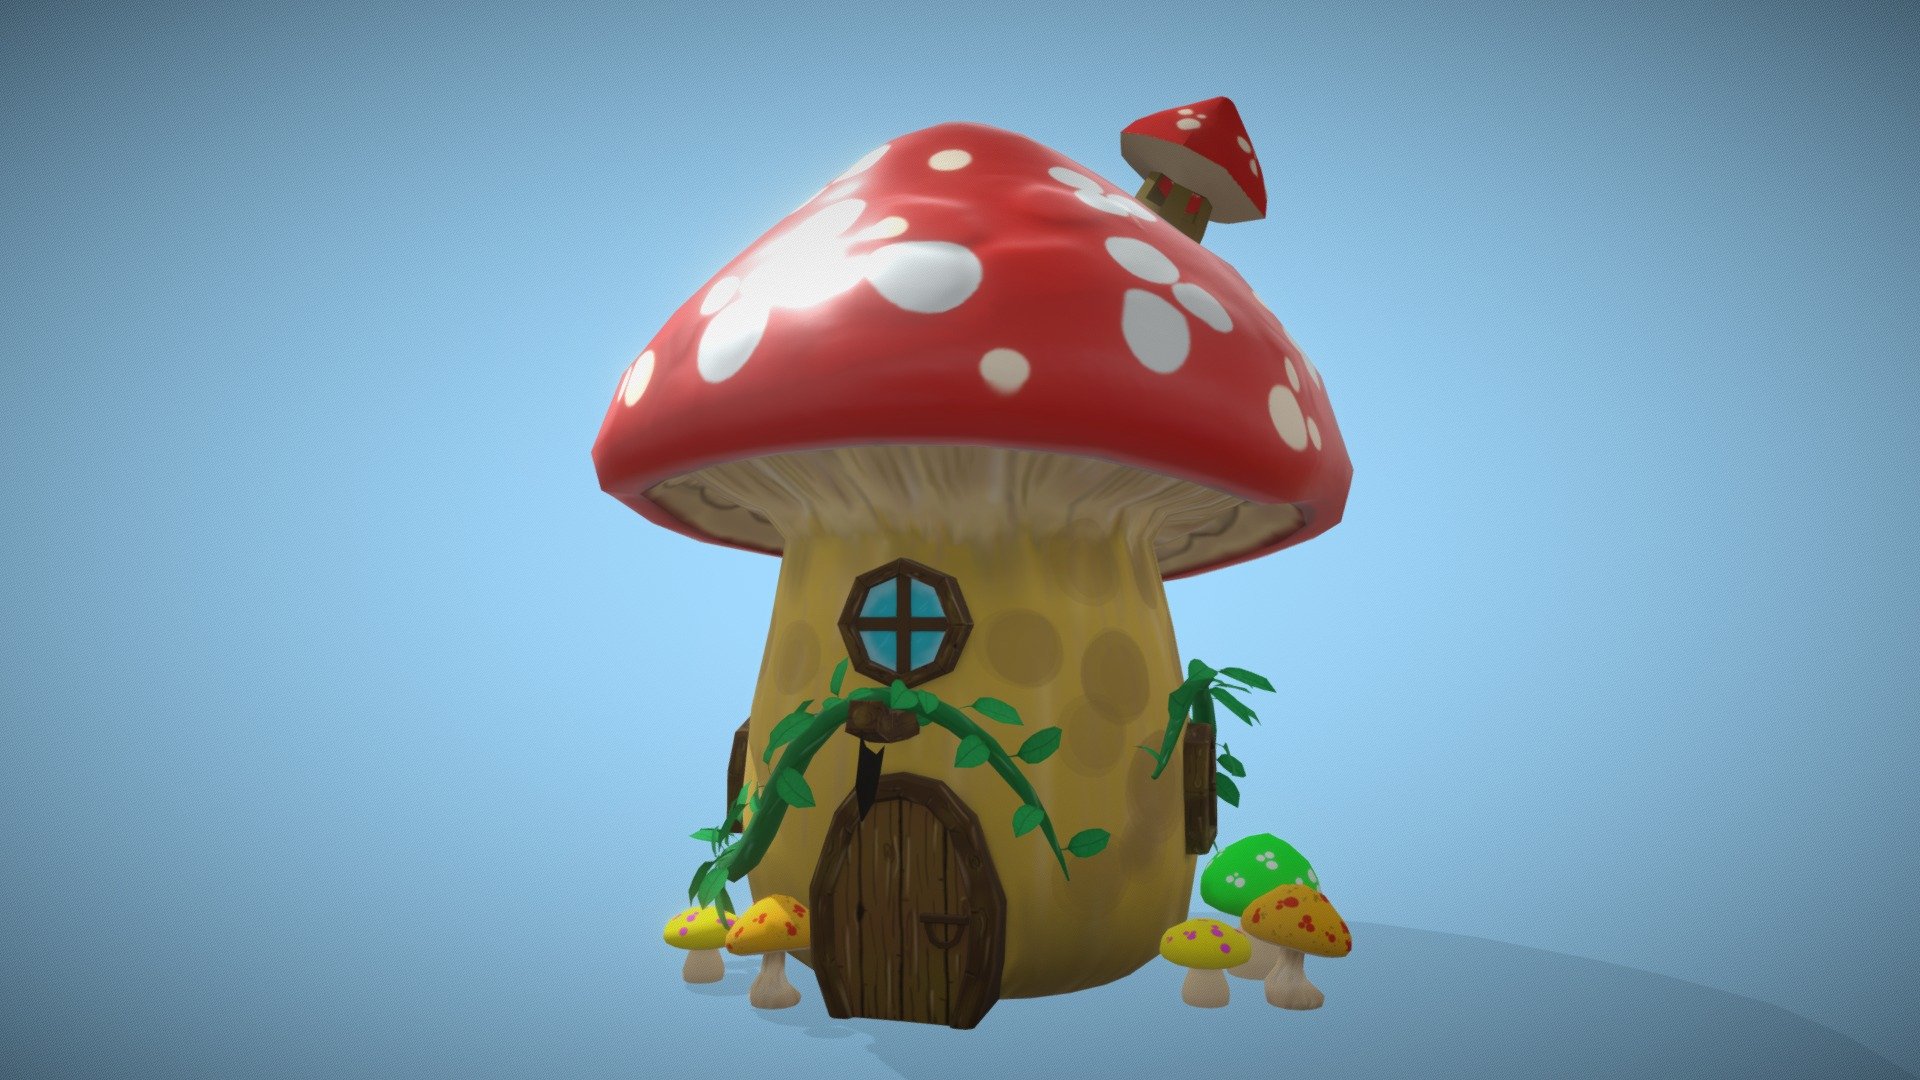 Made with Blender 2.90

3D format :
- fbx
- obj
- blend

Texture :
- Albedo
- Roughnes
- AO
- NM

Polygon :
- Faces : 2.827
- Triangle : 5.654

All Schene : https://skfb.ly/o66SE
Tree House : https://skfb.ly/o6qEw - Stylized Mushroom House - Buy Royalty Free 3D model by pcy78 3d model